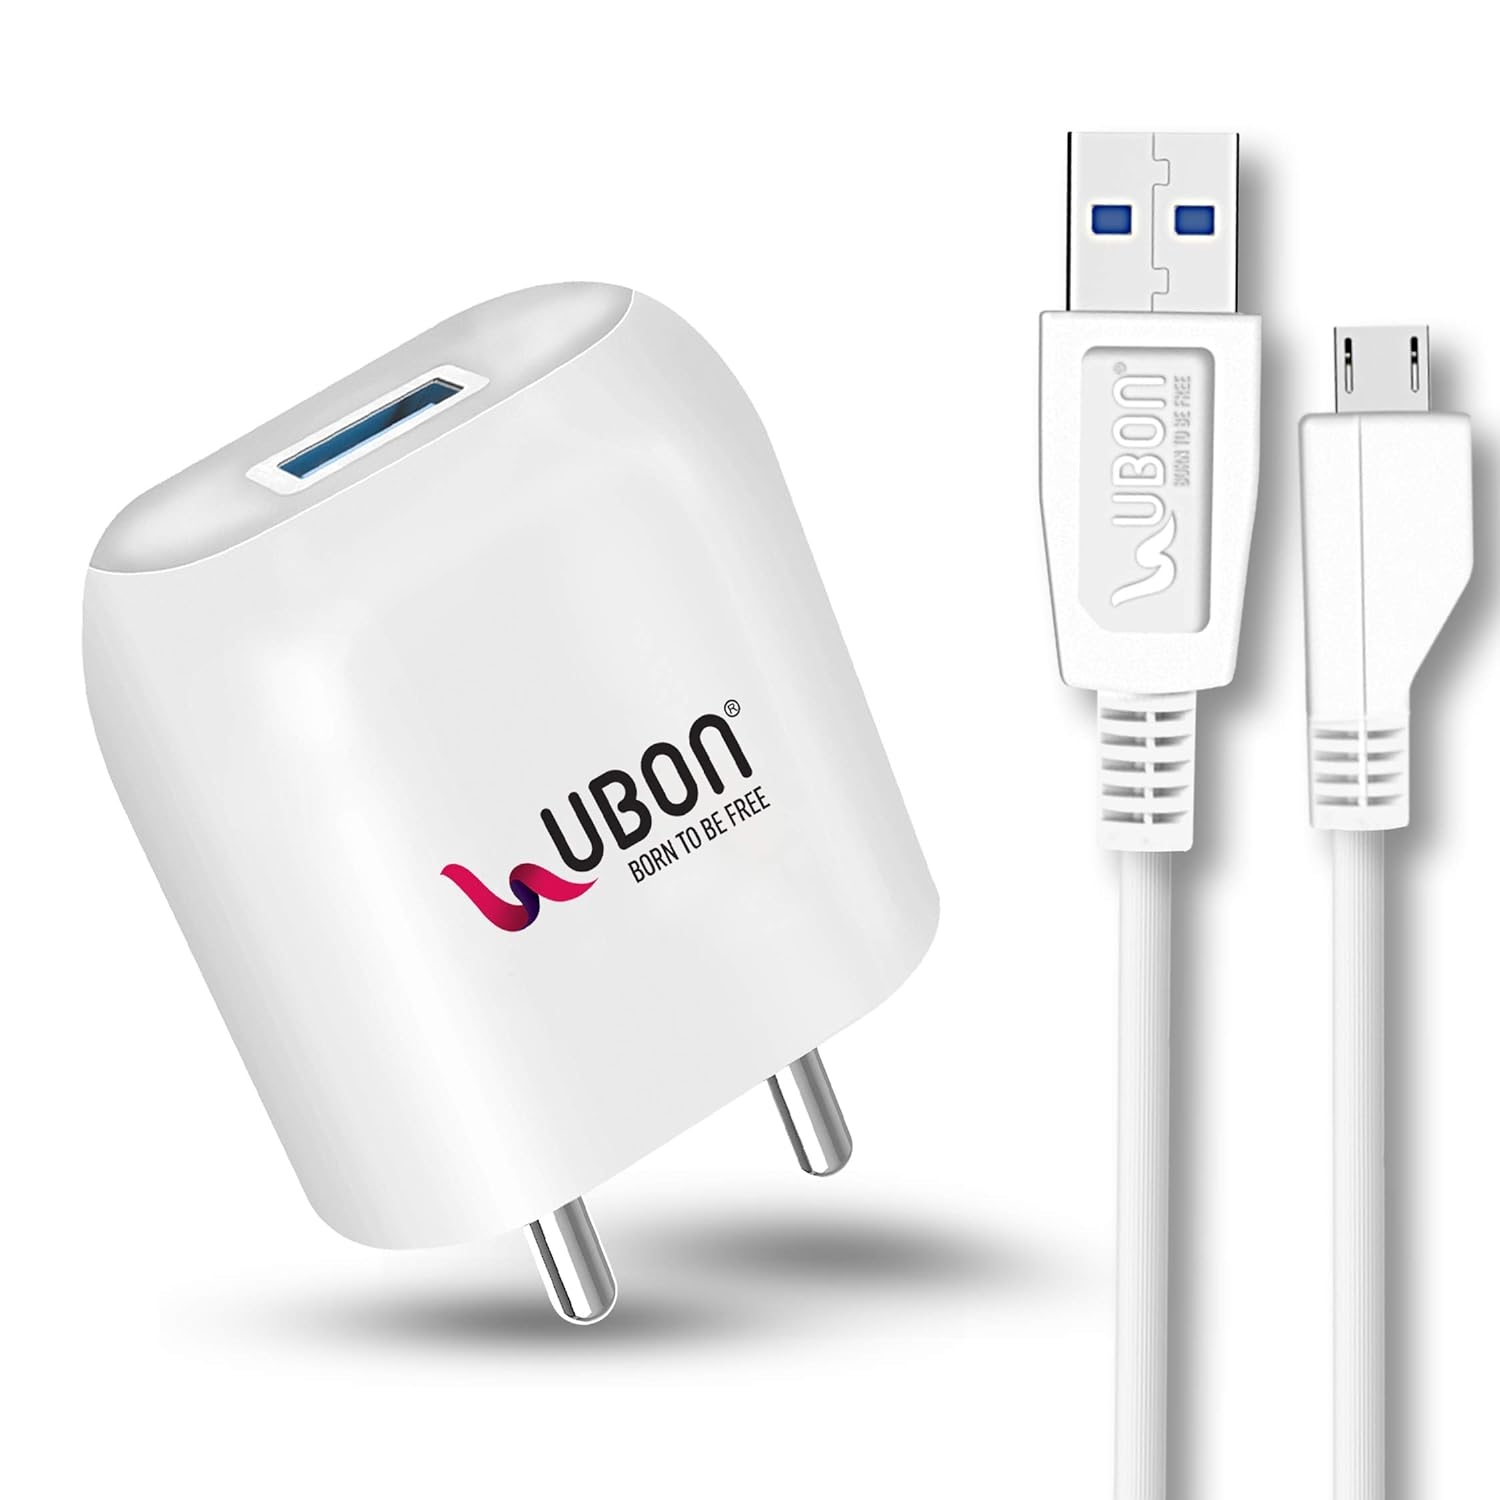 UBON Boost Series Mobile Charger CH-58 2.4 Amp Wall Charger Fast Charging Adapter with Micro USB Cable for Smartphone & Tablets, BIS Certified, Smart Protection for Short Circuit & Overheating- White